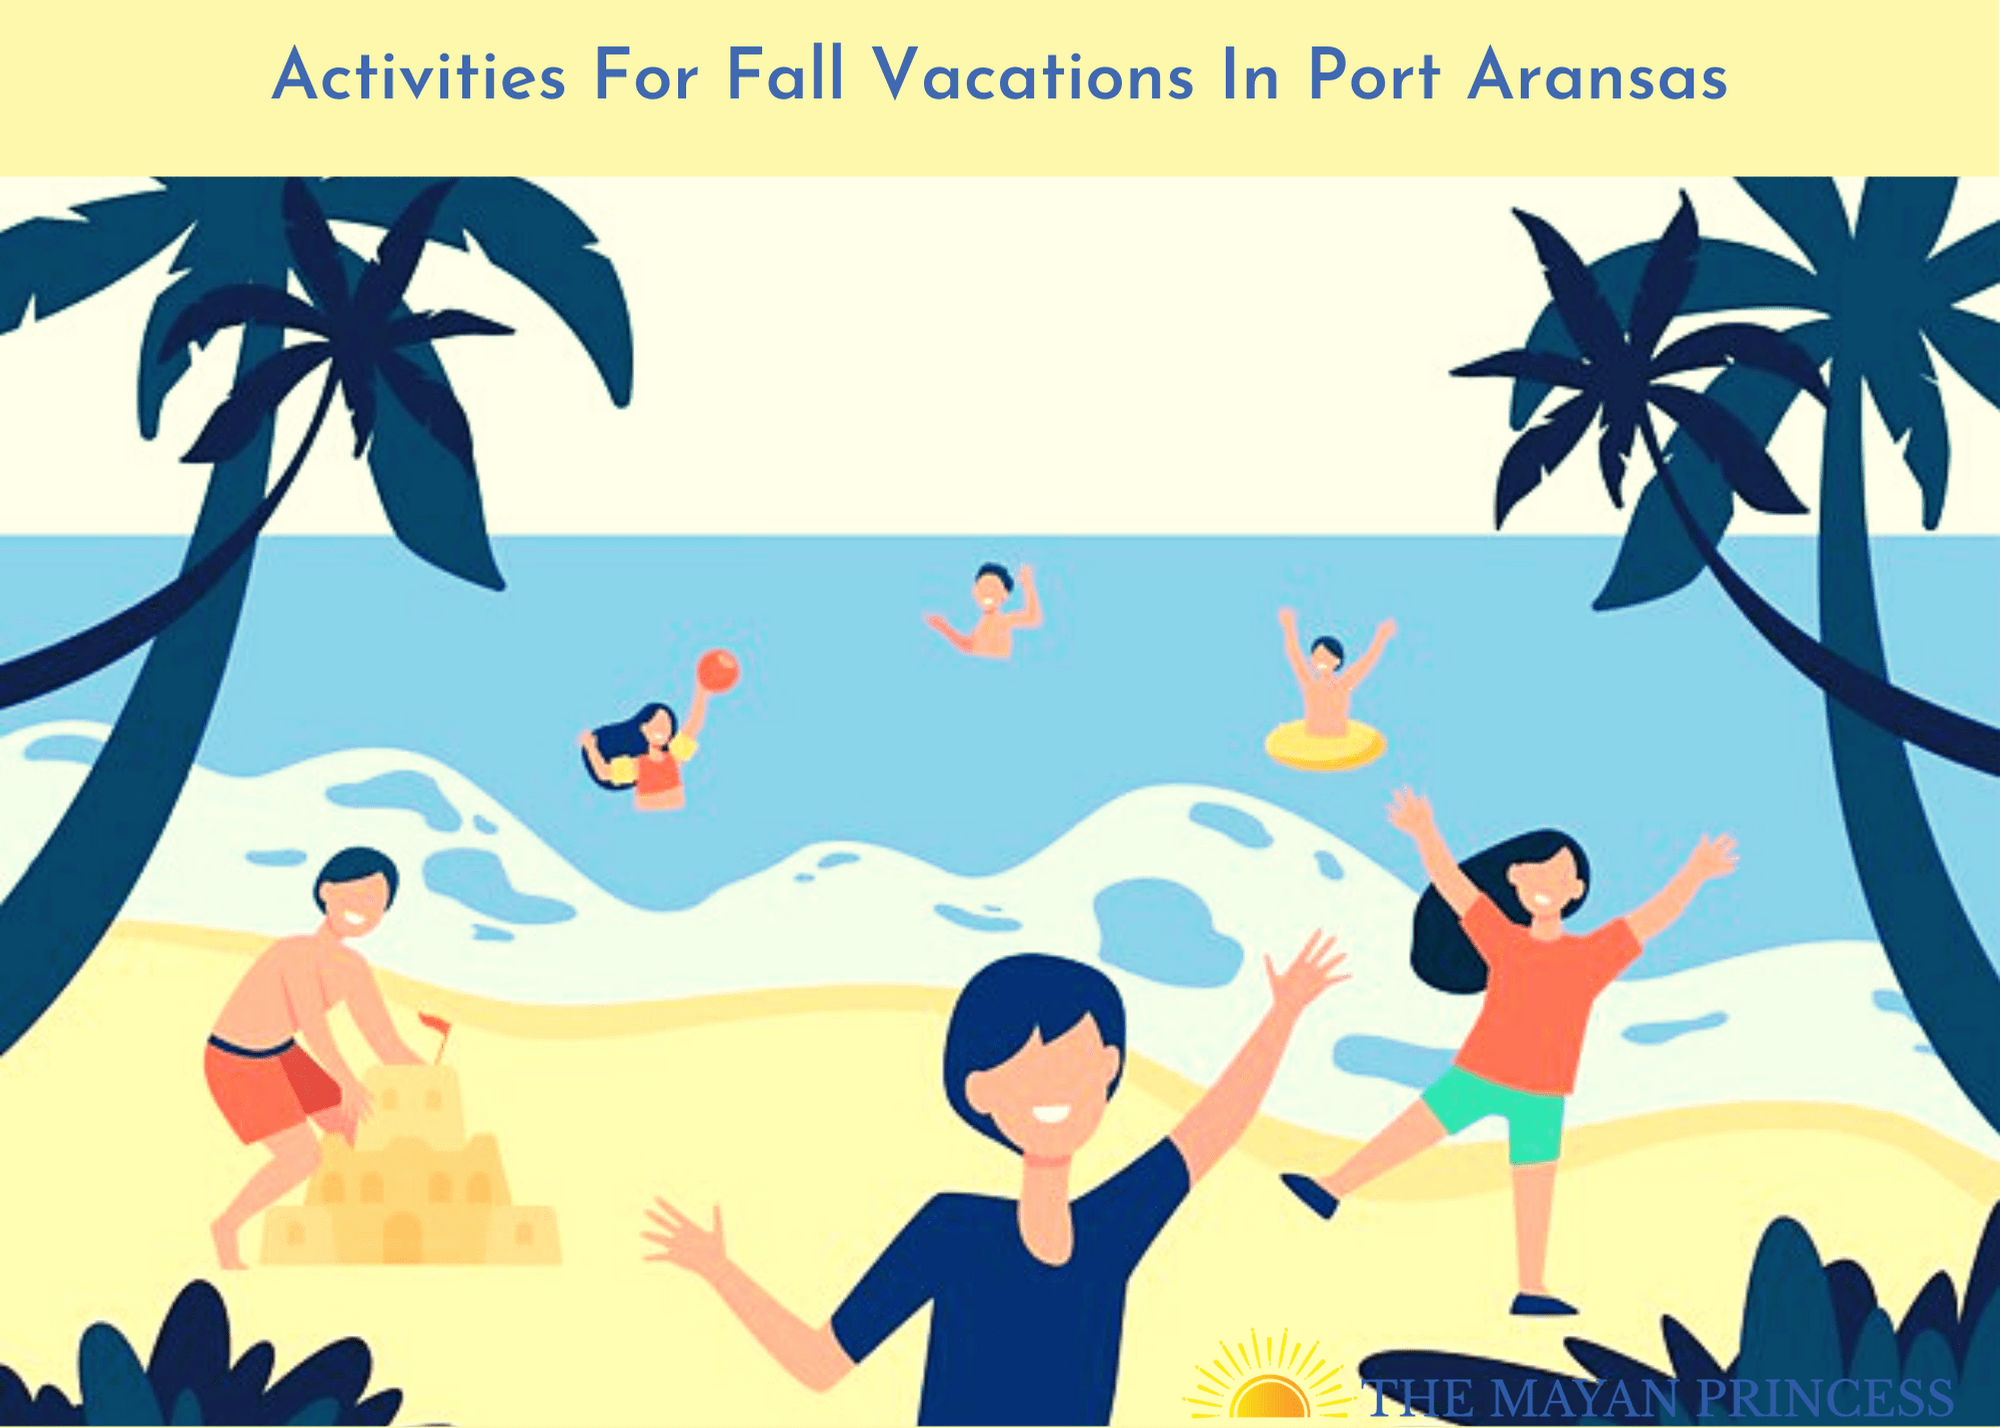 Activities For Fall Vacations In Port Aransas